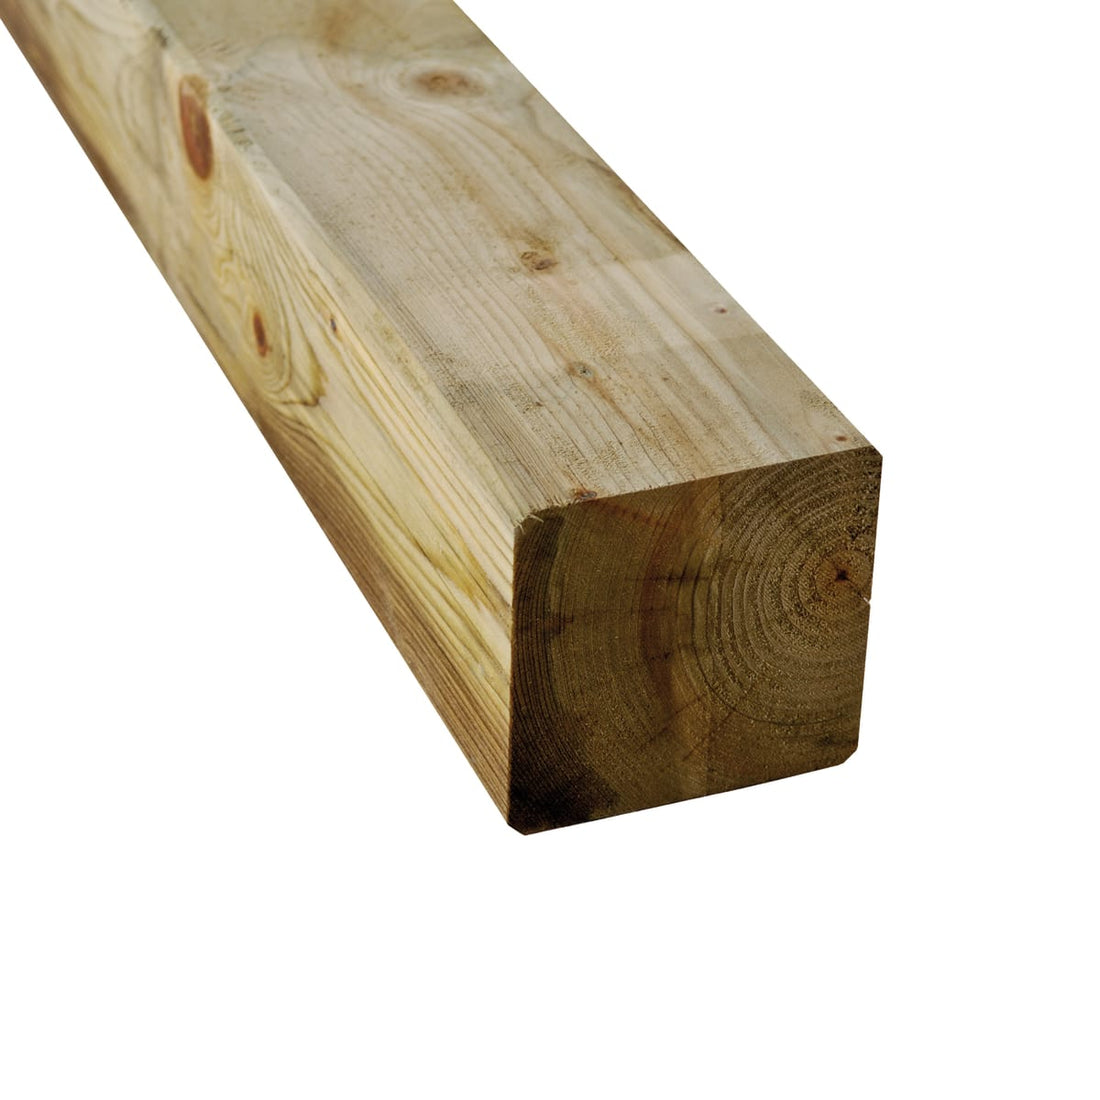 7 X 7 X H 240 CM SQUARE POLE OF AUTOCLAVE-TREATED PINE WOOD